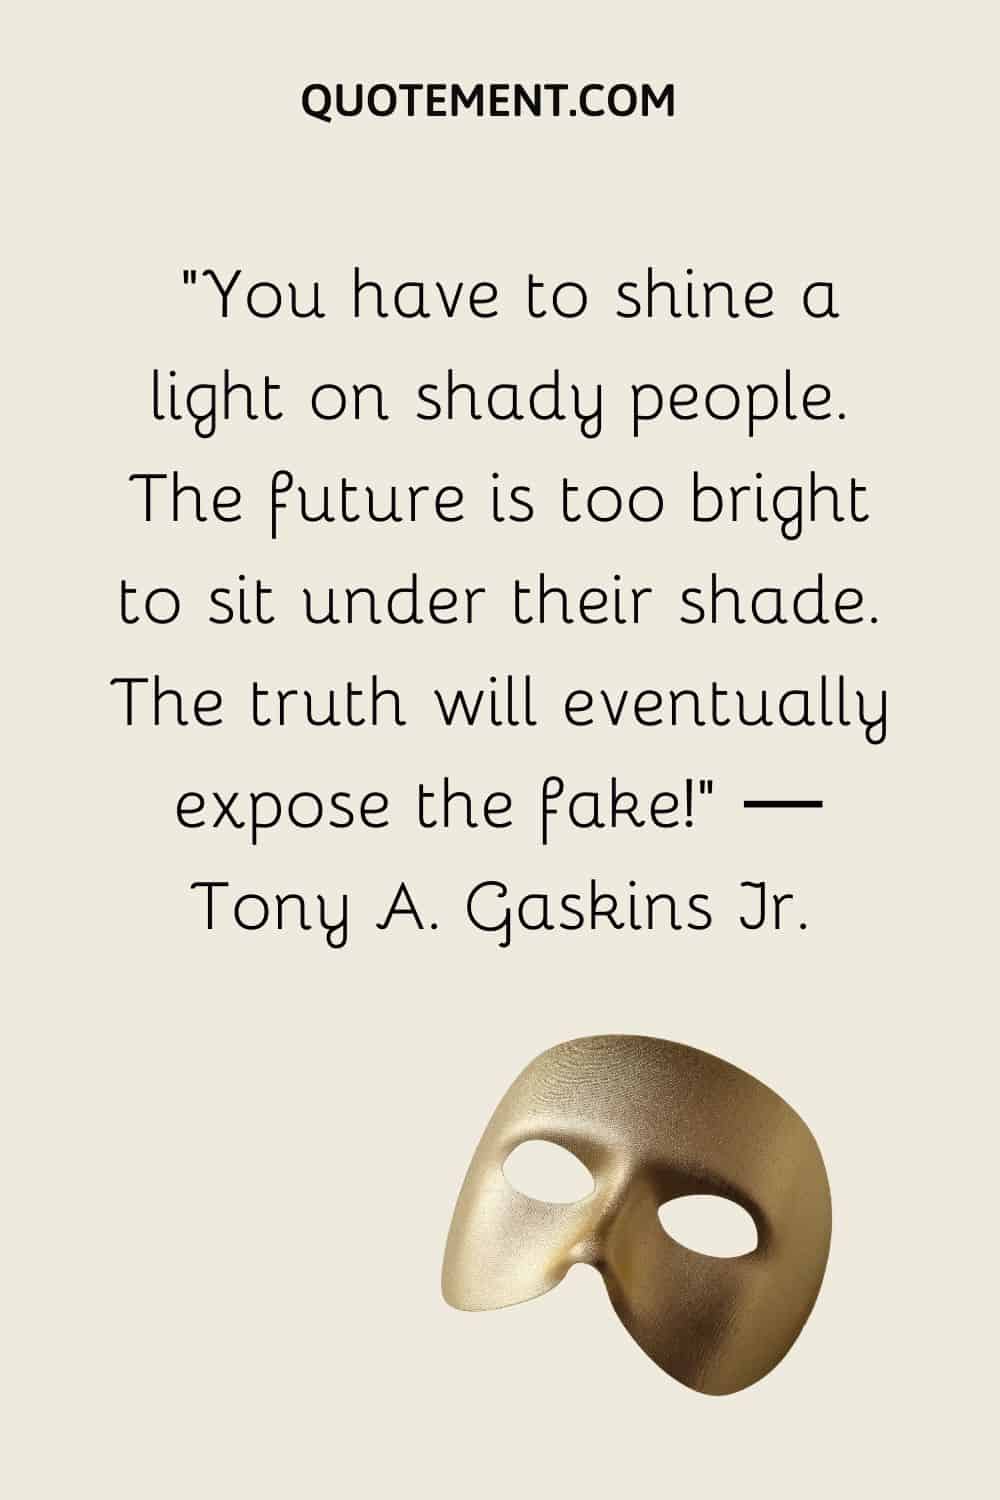 golden mask image representing shady people quote